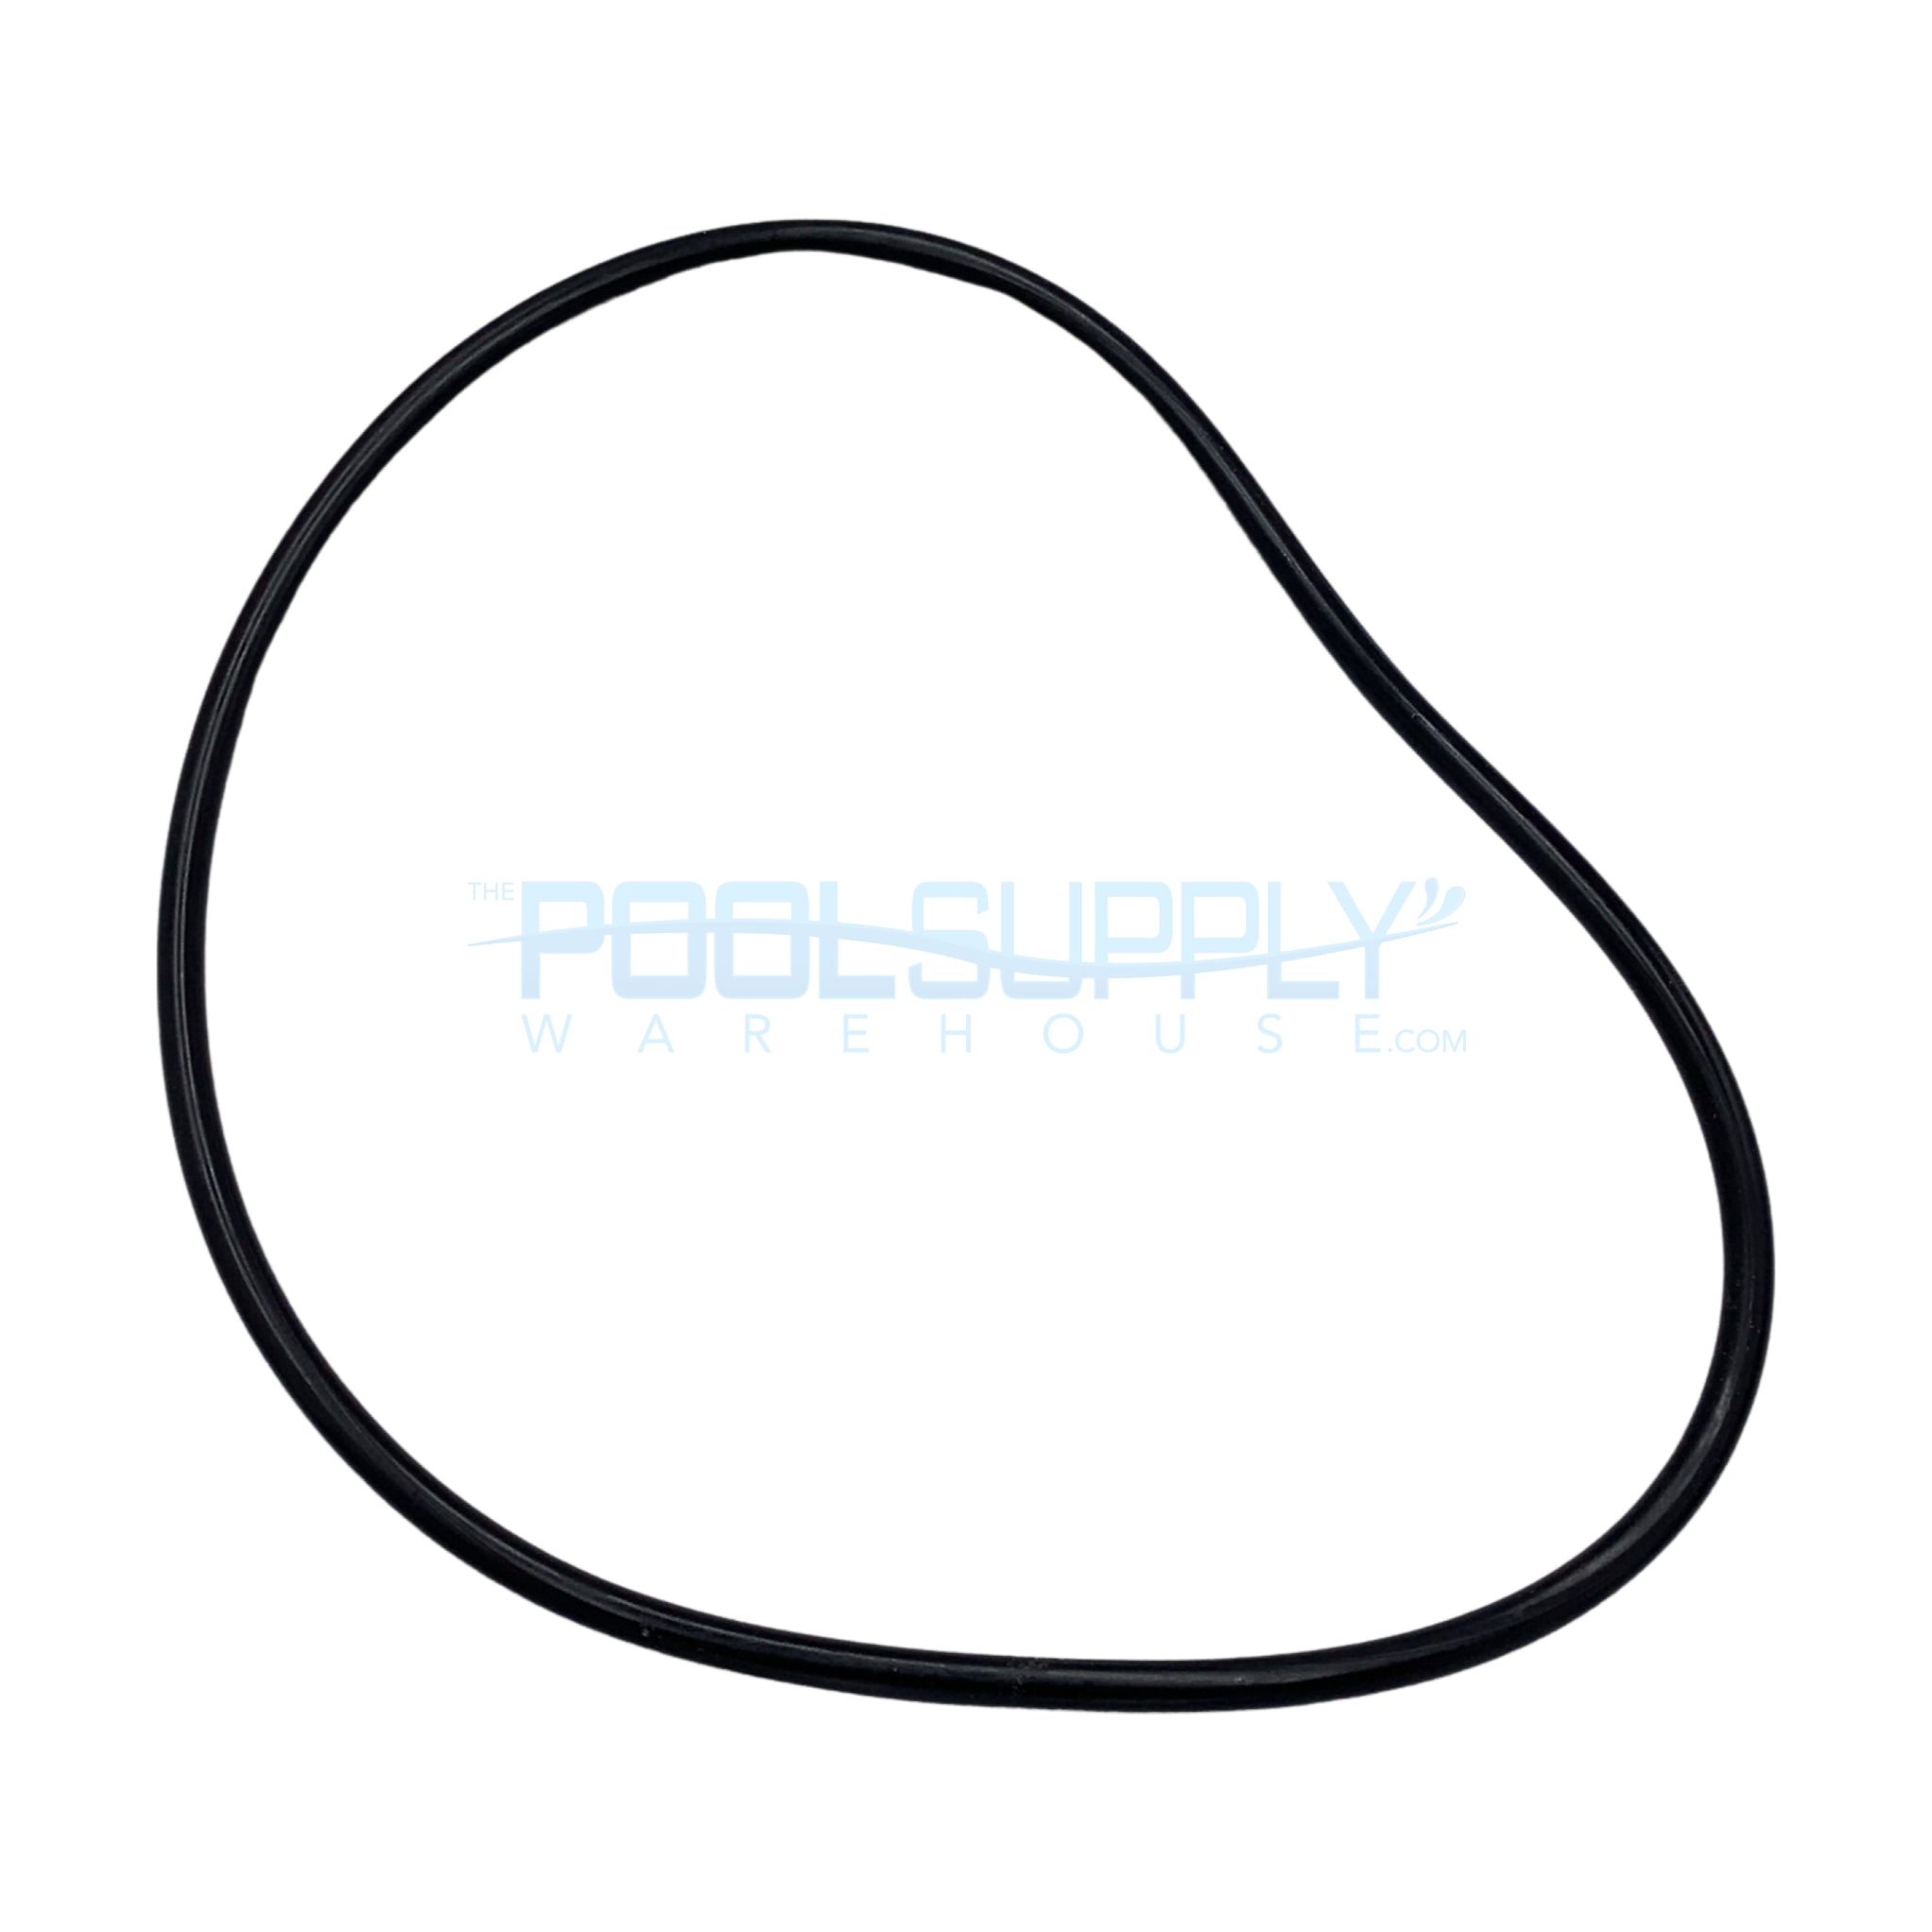 Clean and Clear/Warrior/EasyClean Tank Body O-Ring - 87300400Z - The Pool Supply Warehouse